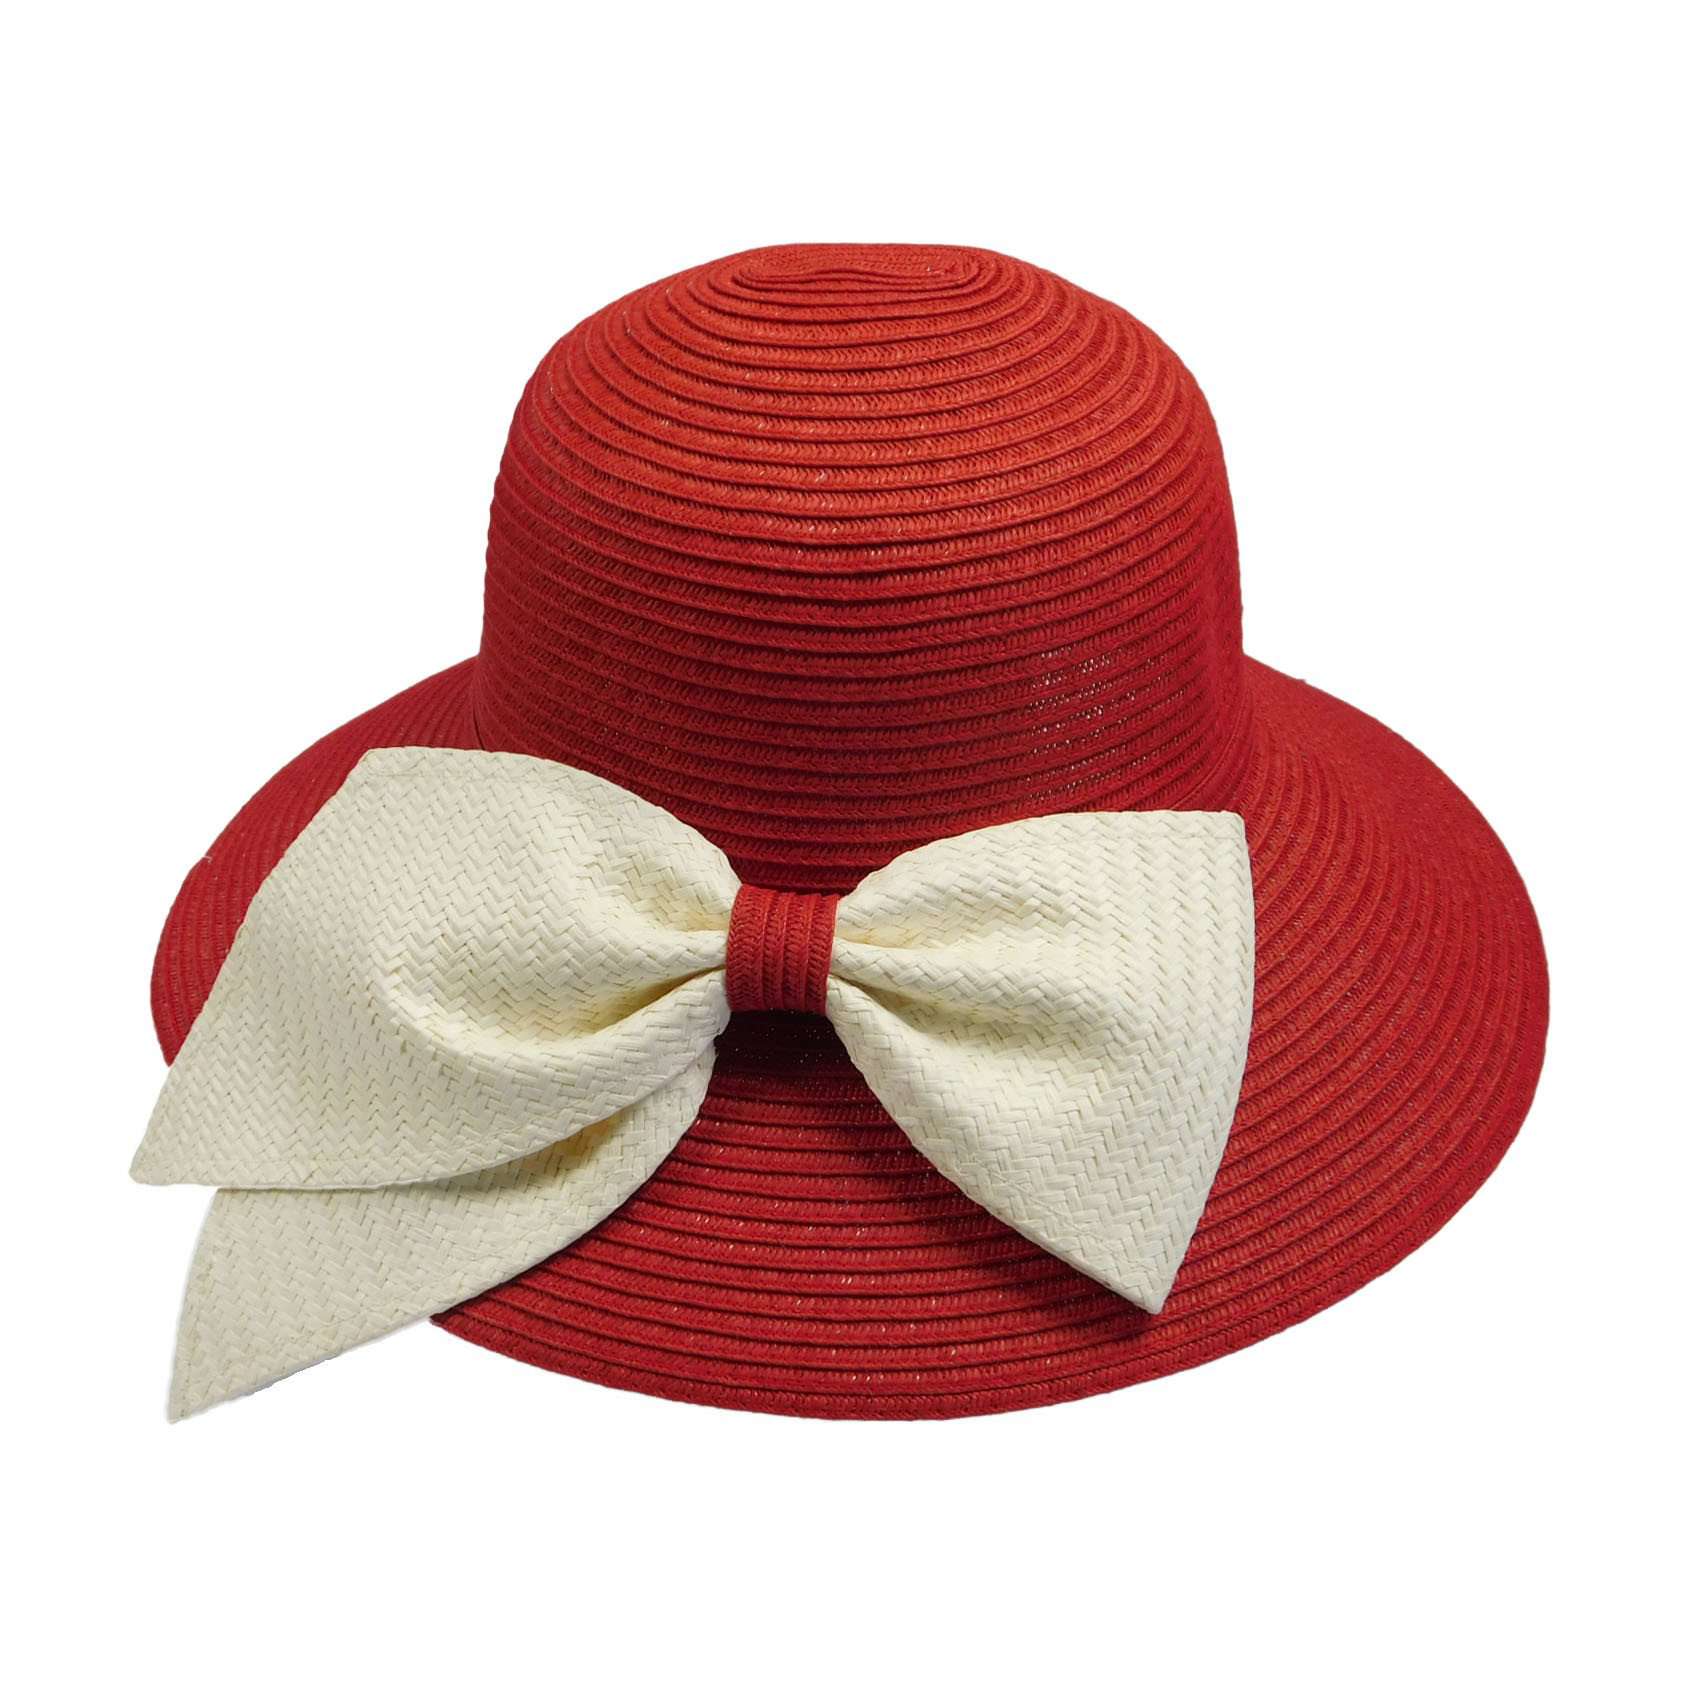 Big Brim Sun Hat with Large Ivory Bow Wide Brim Hat Something Special Hat WSPS697RD Red  